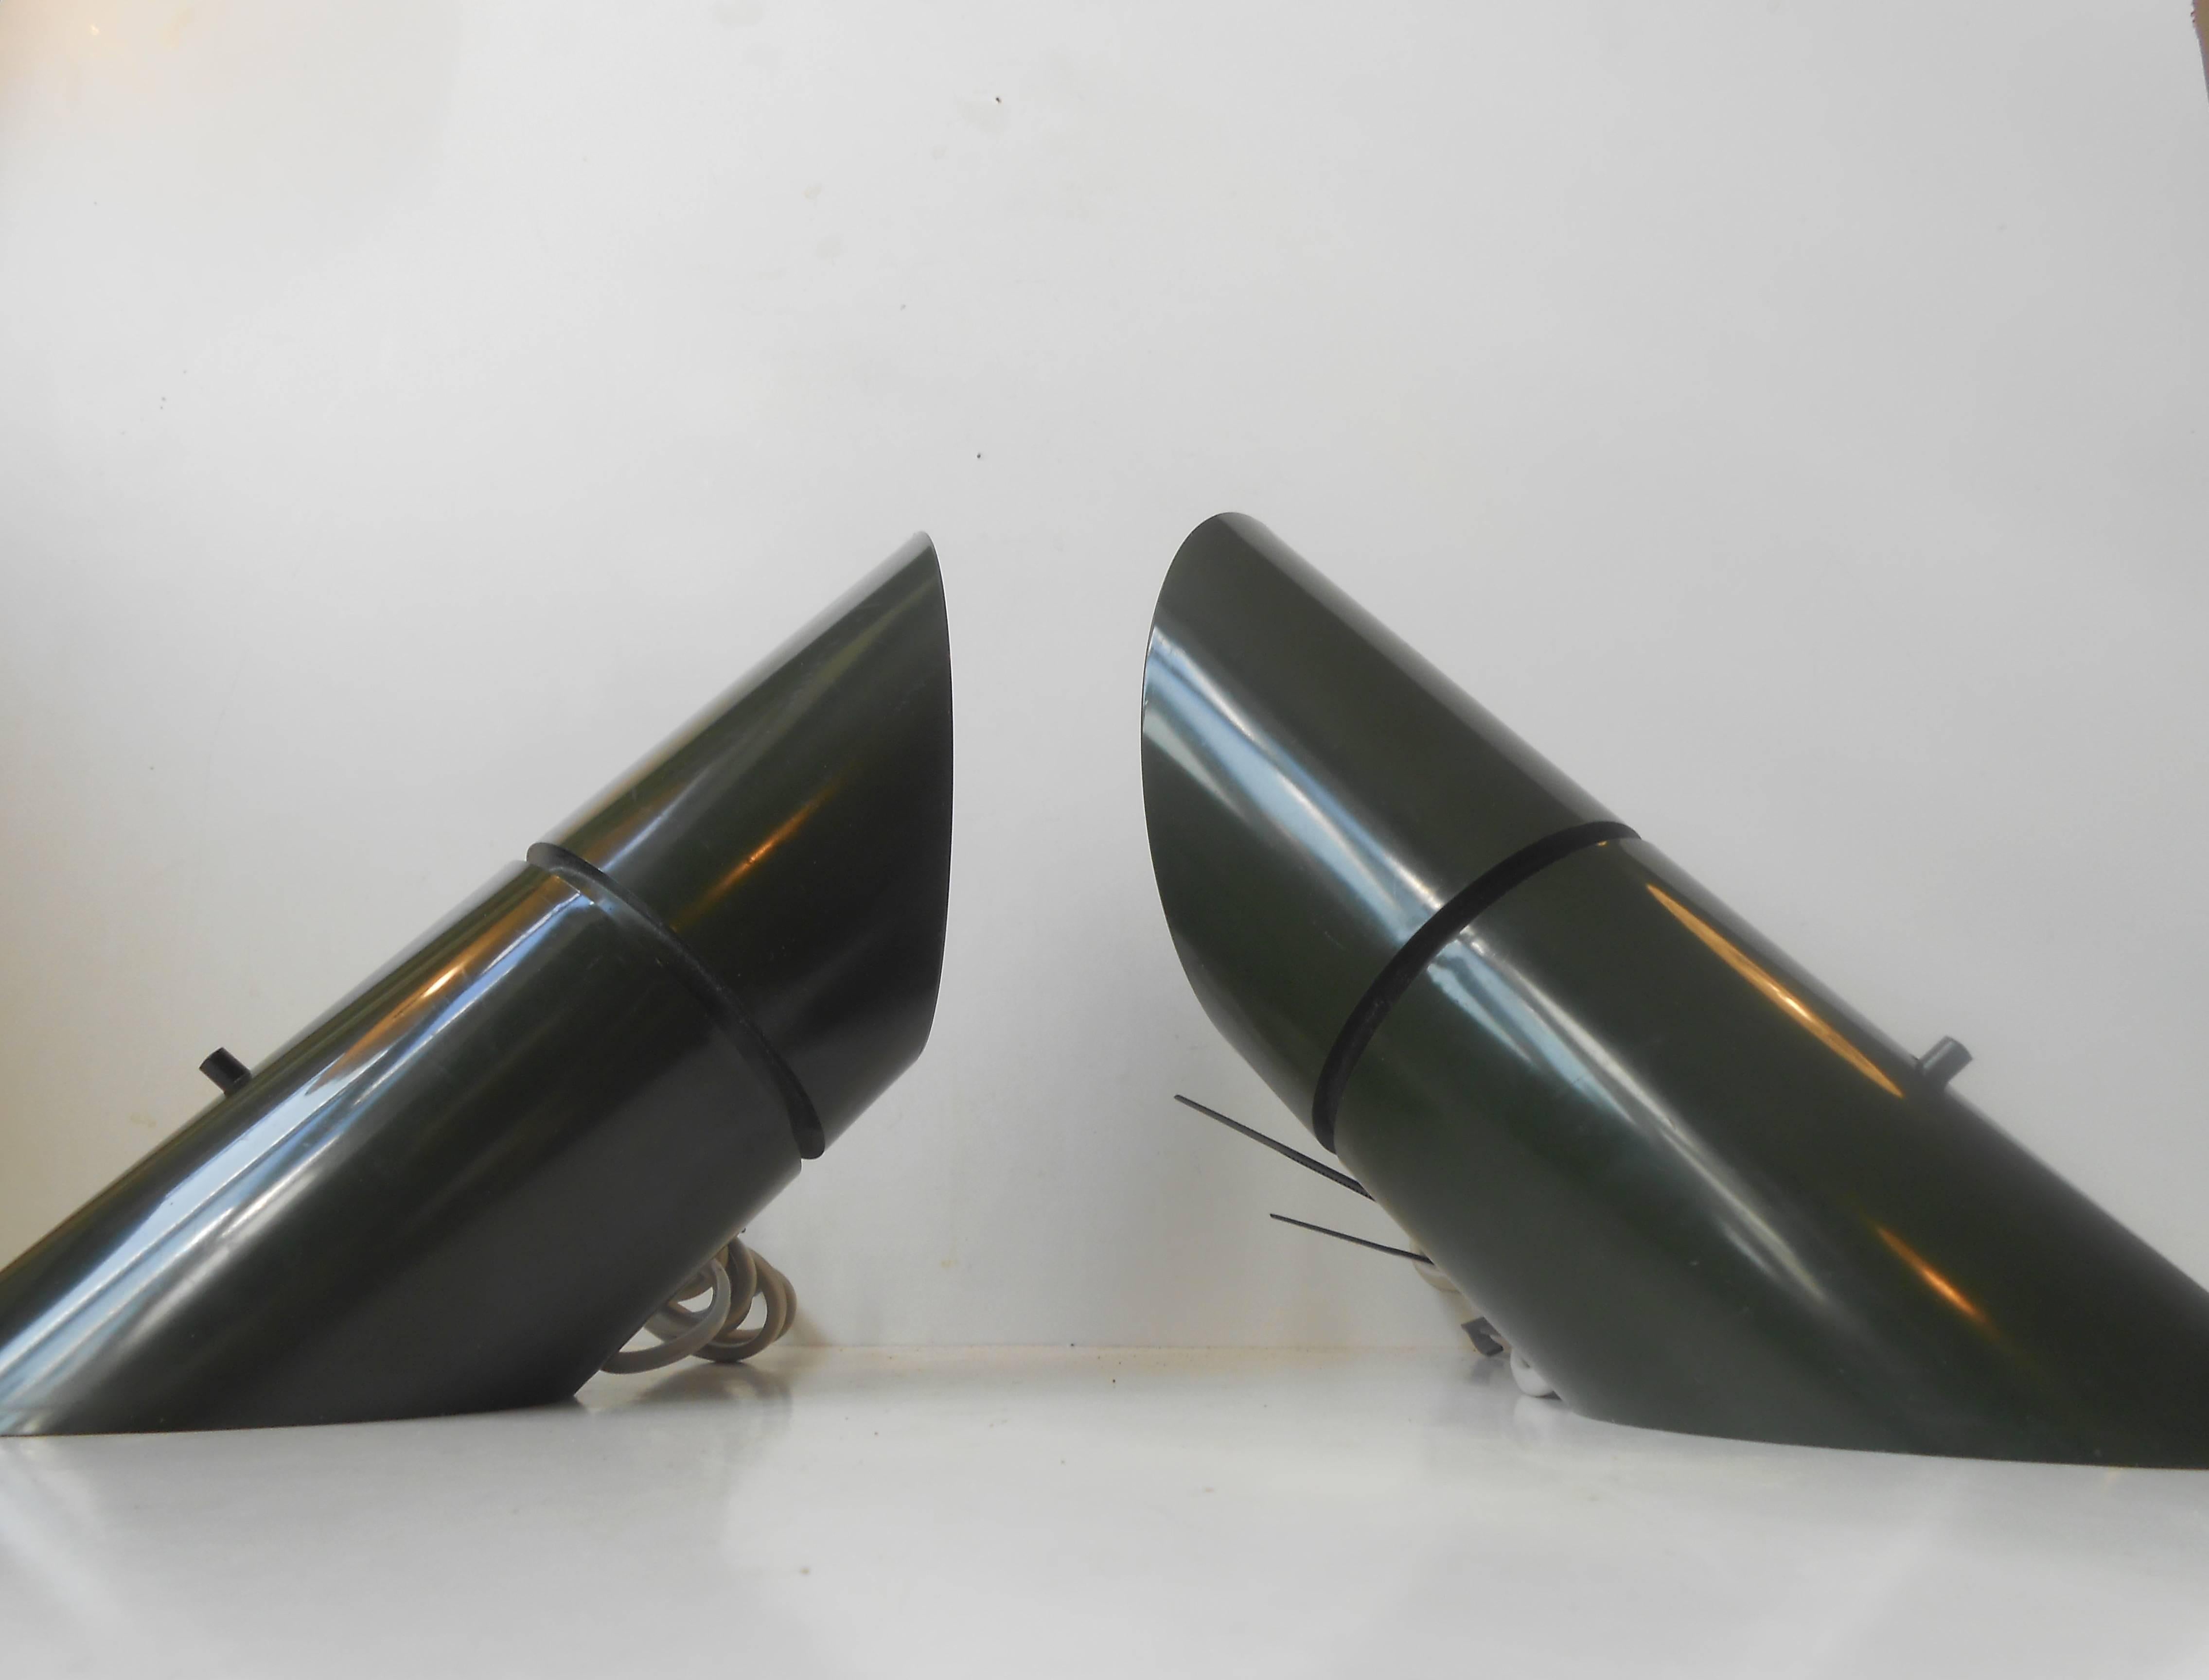 Pair of wall lights, 'Phister' by Hans Due for Fog & Mørup, Denmark, 1977. Dark green plastic with rotating 'Heads,' that allows you to direct the light as desired. Can be used as table lamps as well. Measurements: L/H 11 inches, D 4 inches.